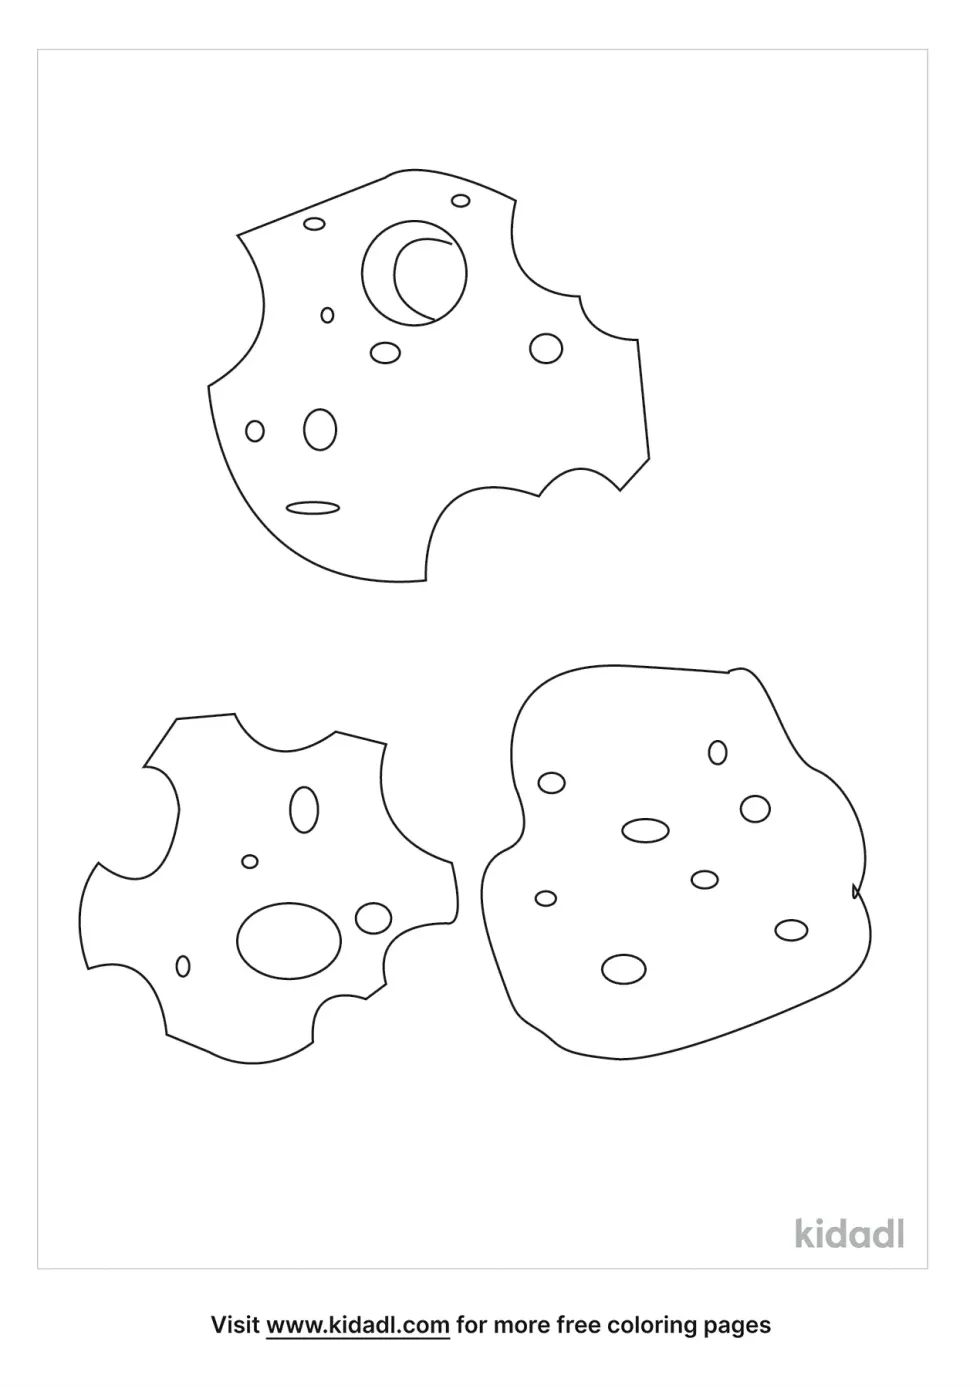 Space Rocks Coloring Page